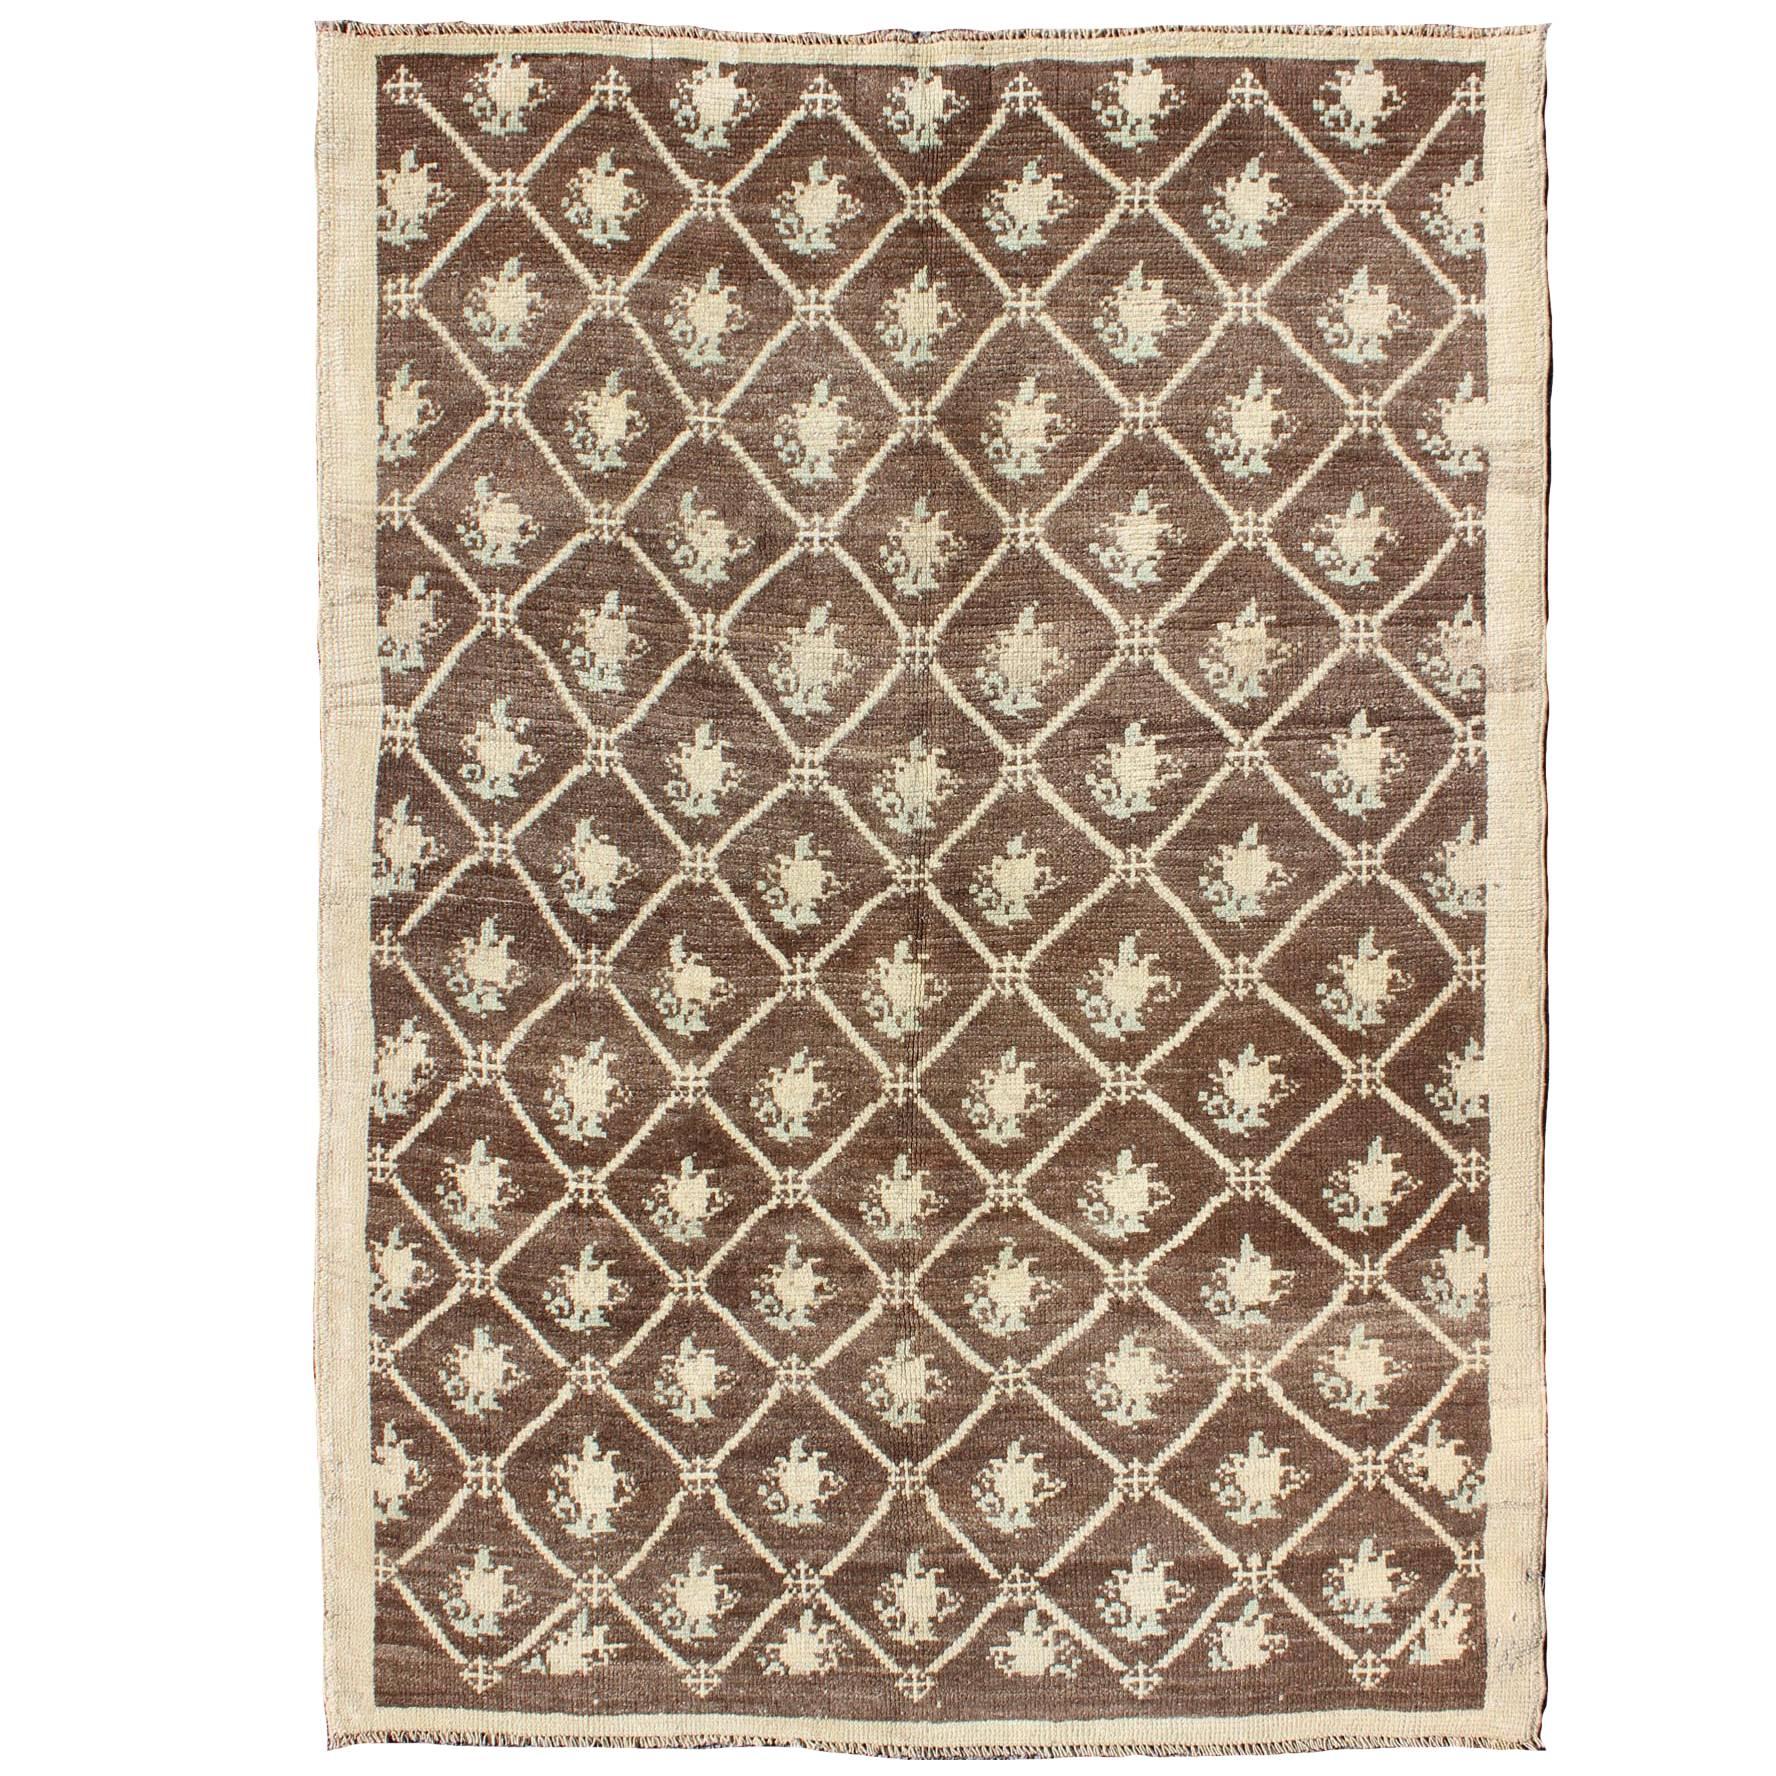 All-Over Design Turkish Tulu Carpet in Shades of Brown and Cream For Sale